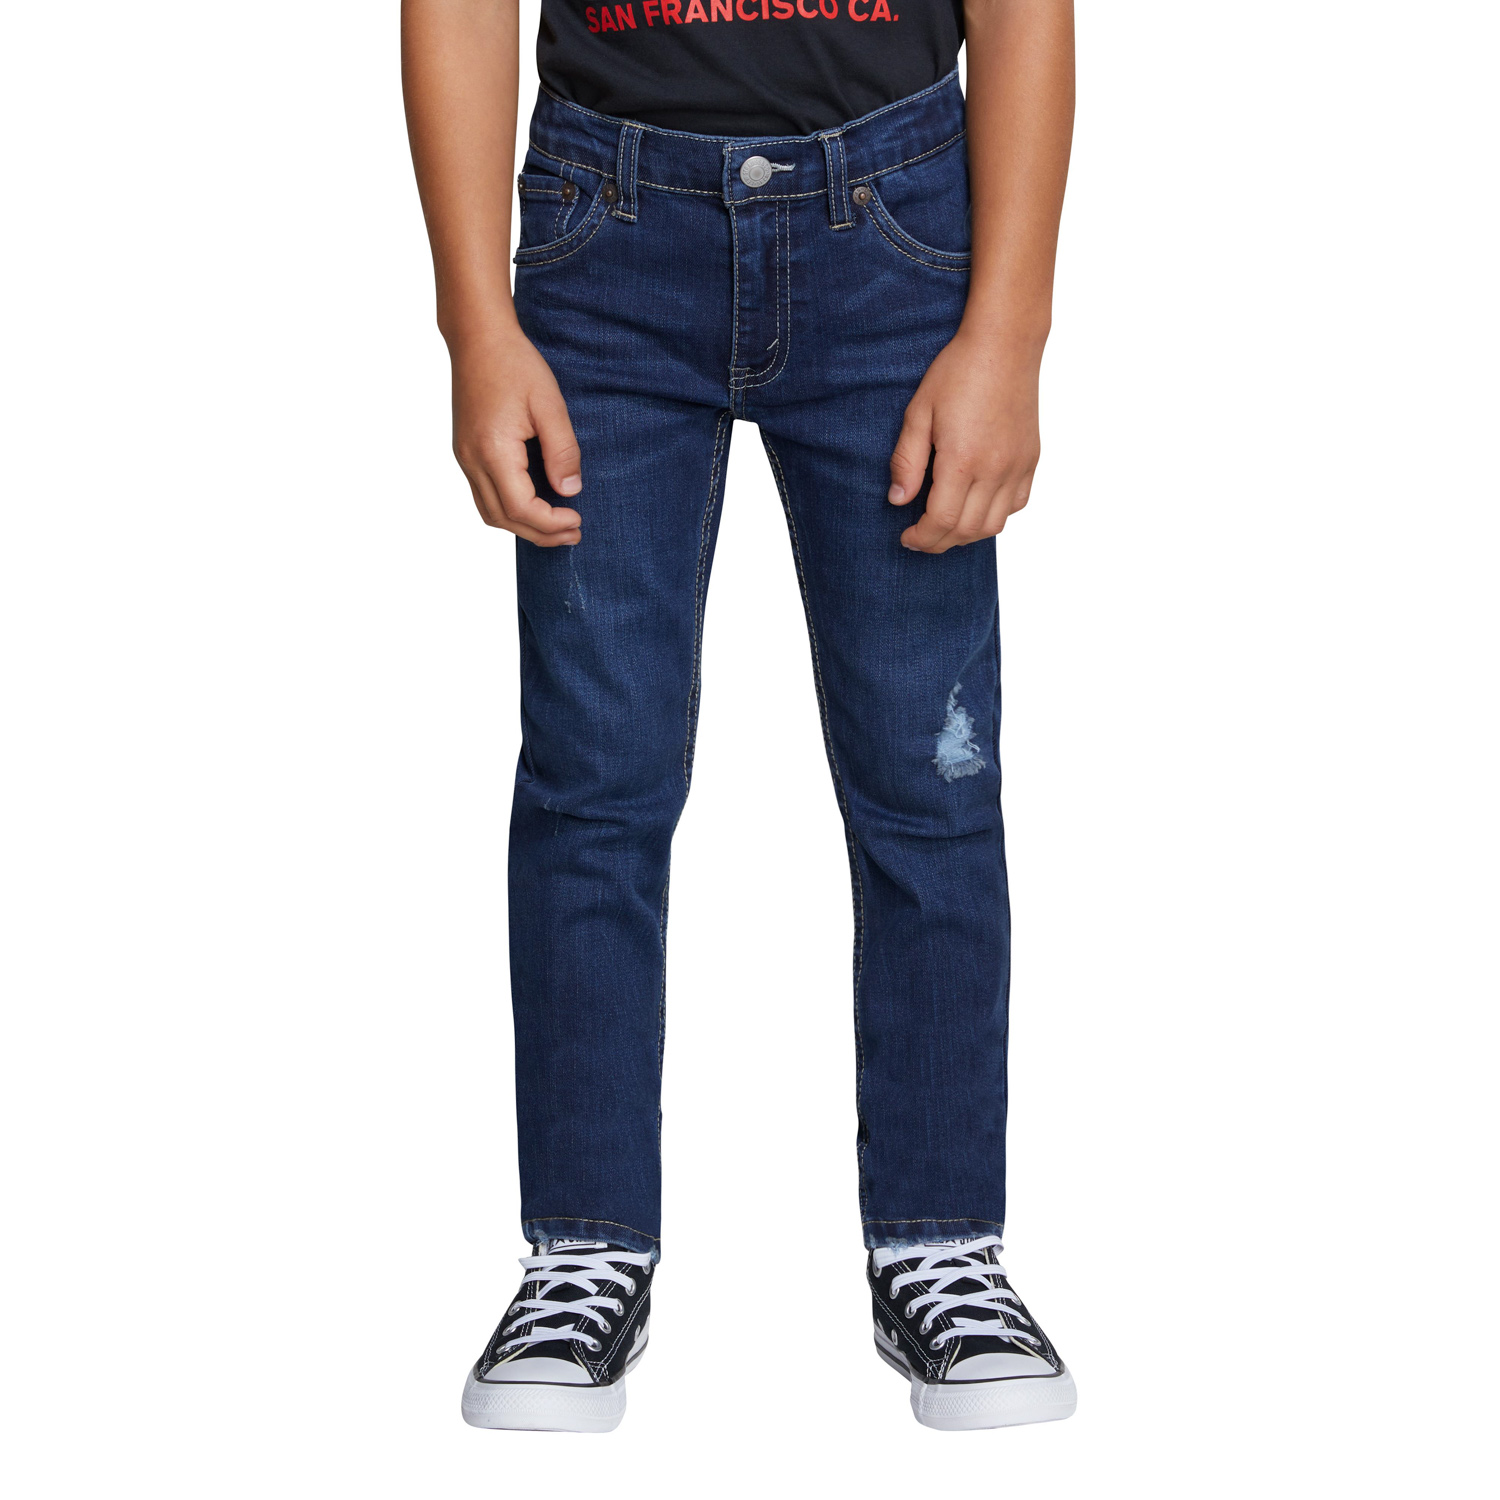 Levi's Boys' 510 Skinny Fit Performance Jeans, Sizes 4-20 - image 5 of 9